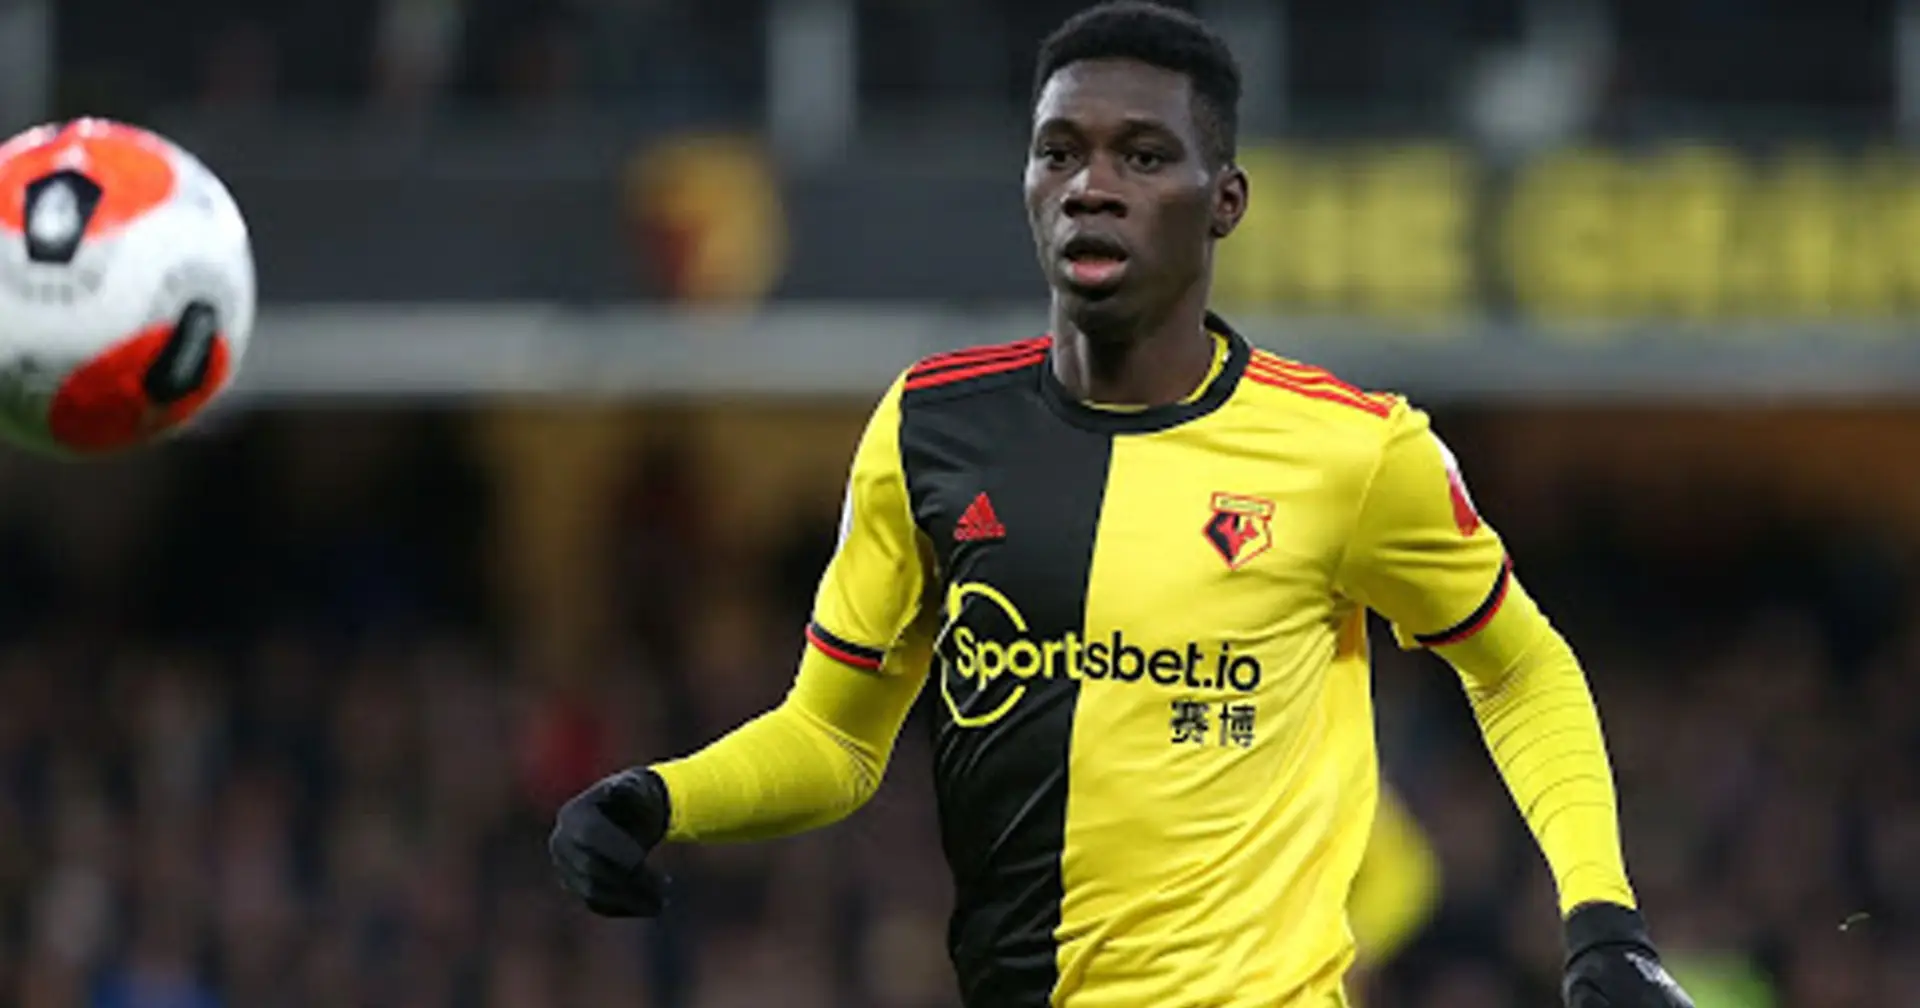 Man United 'make contact' for Ismaila Sarr as Sancho deal remains in limbo (reliability: 4 stars)